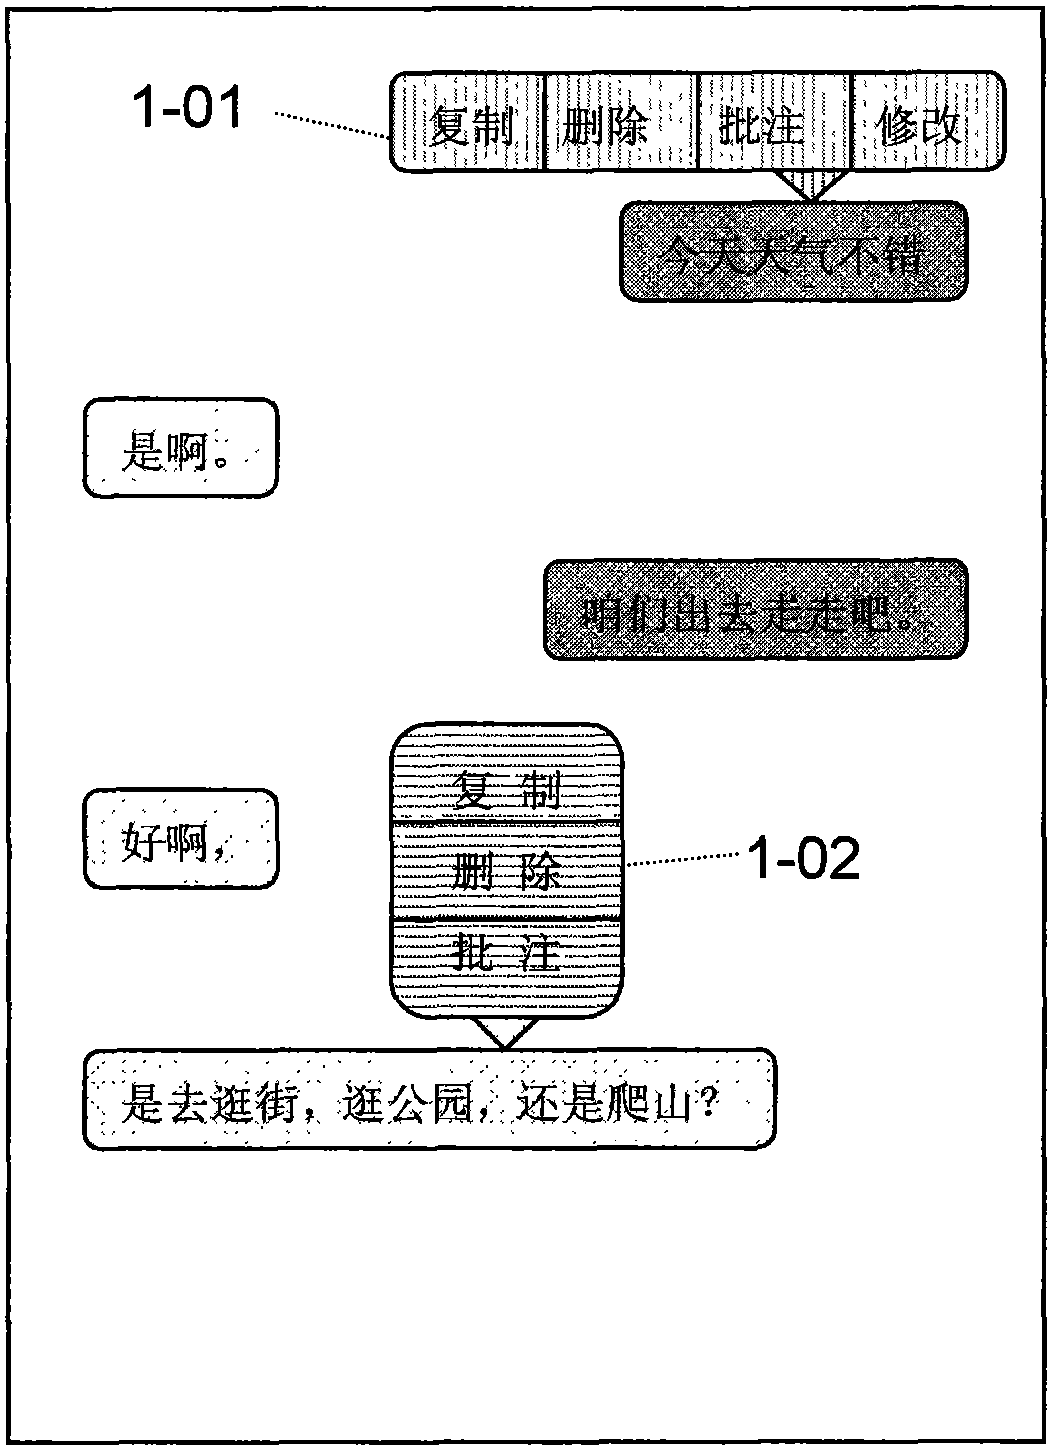 Method and device for commenting and additionally modifying message